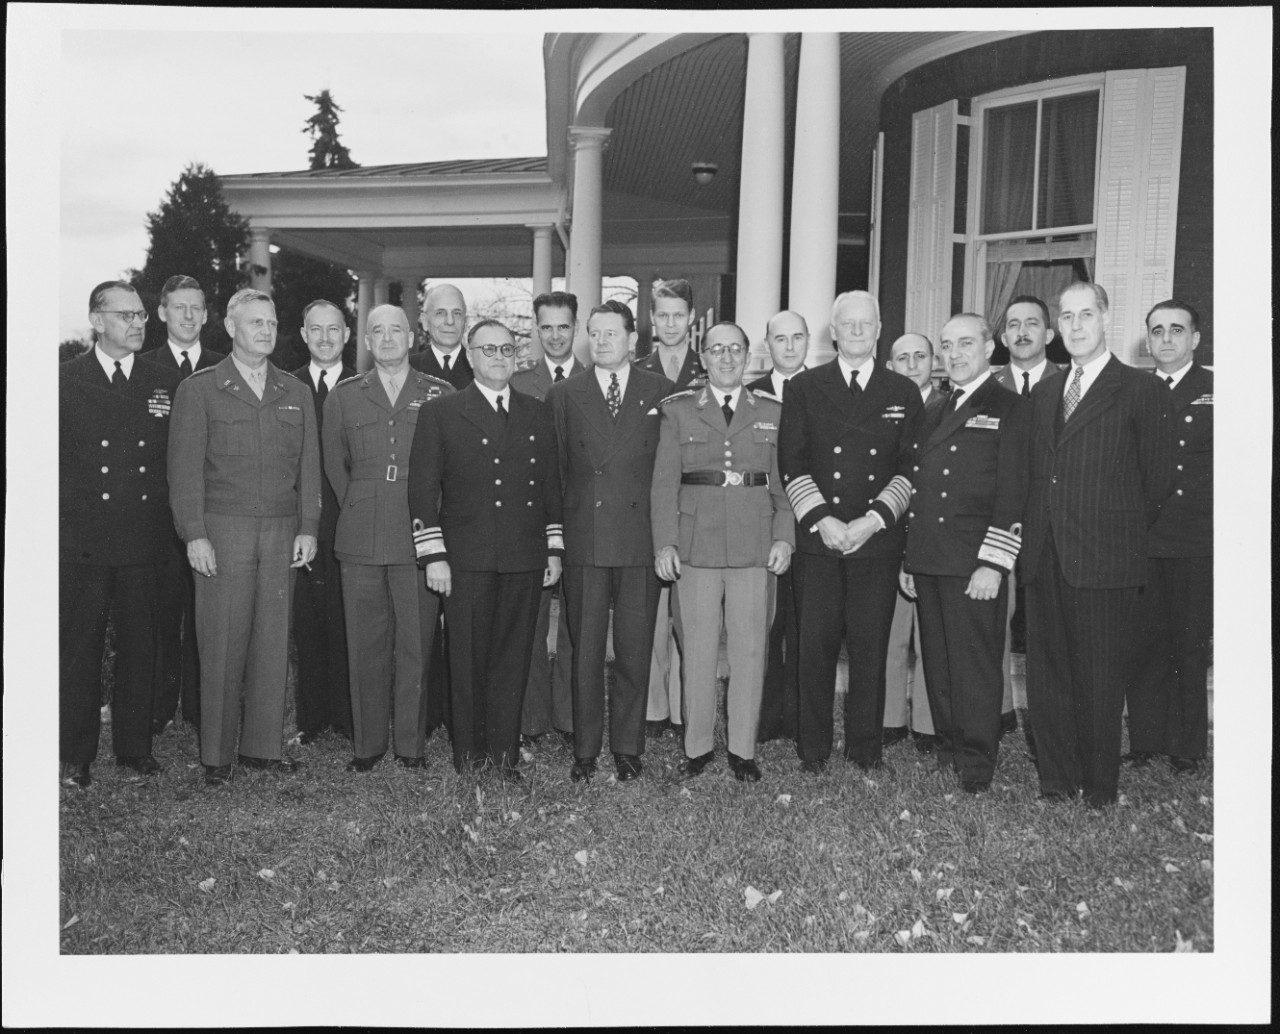 Nimitz with Officers in front of House